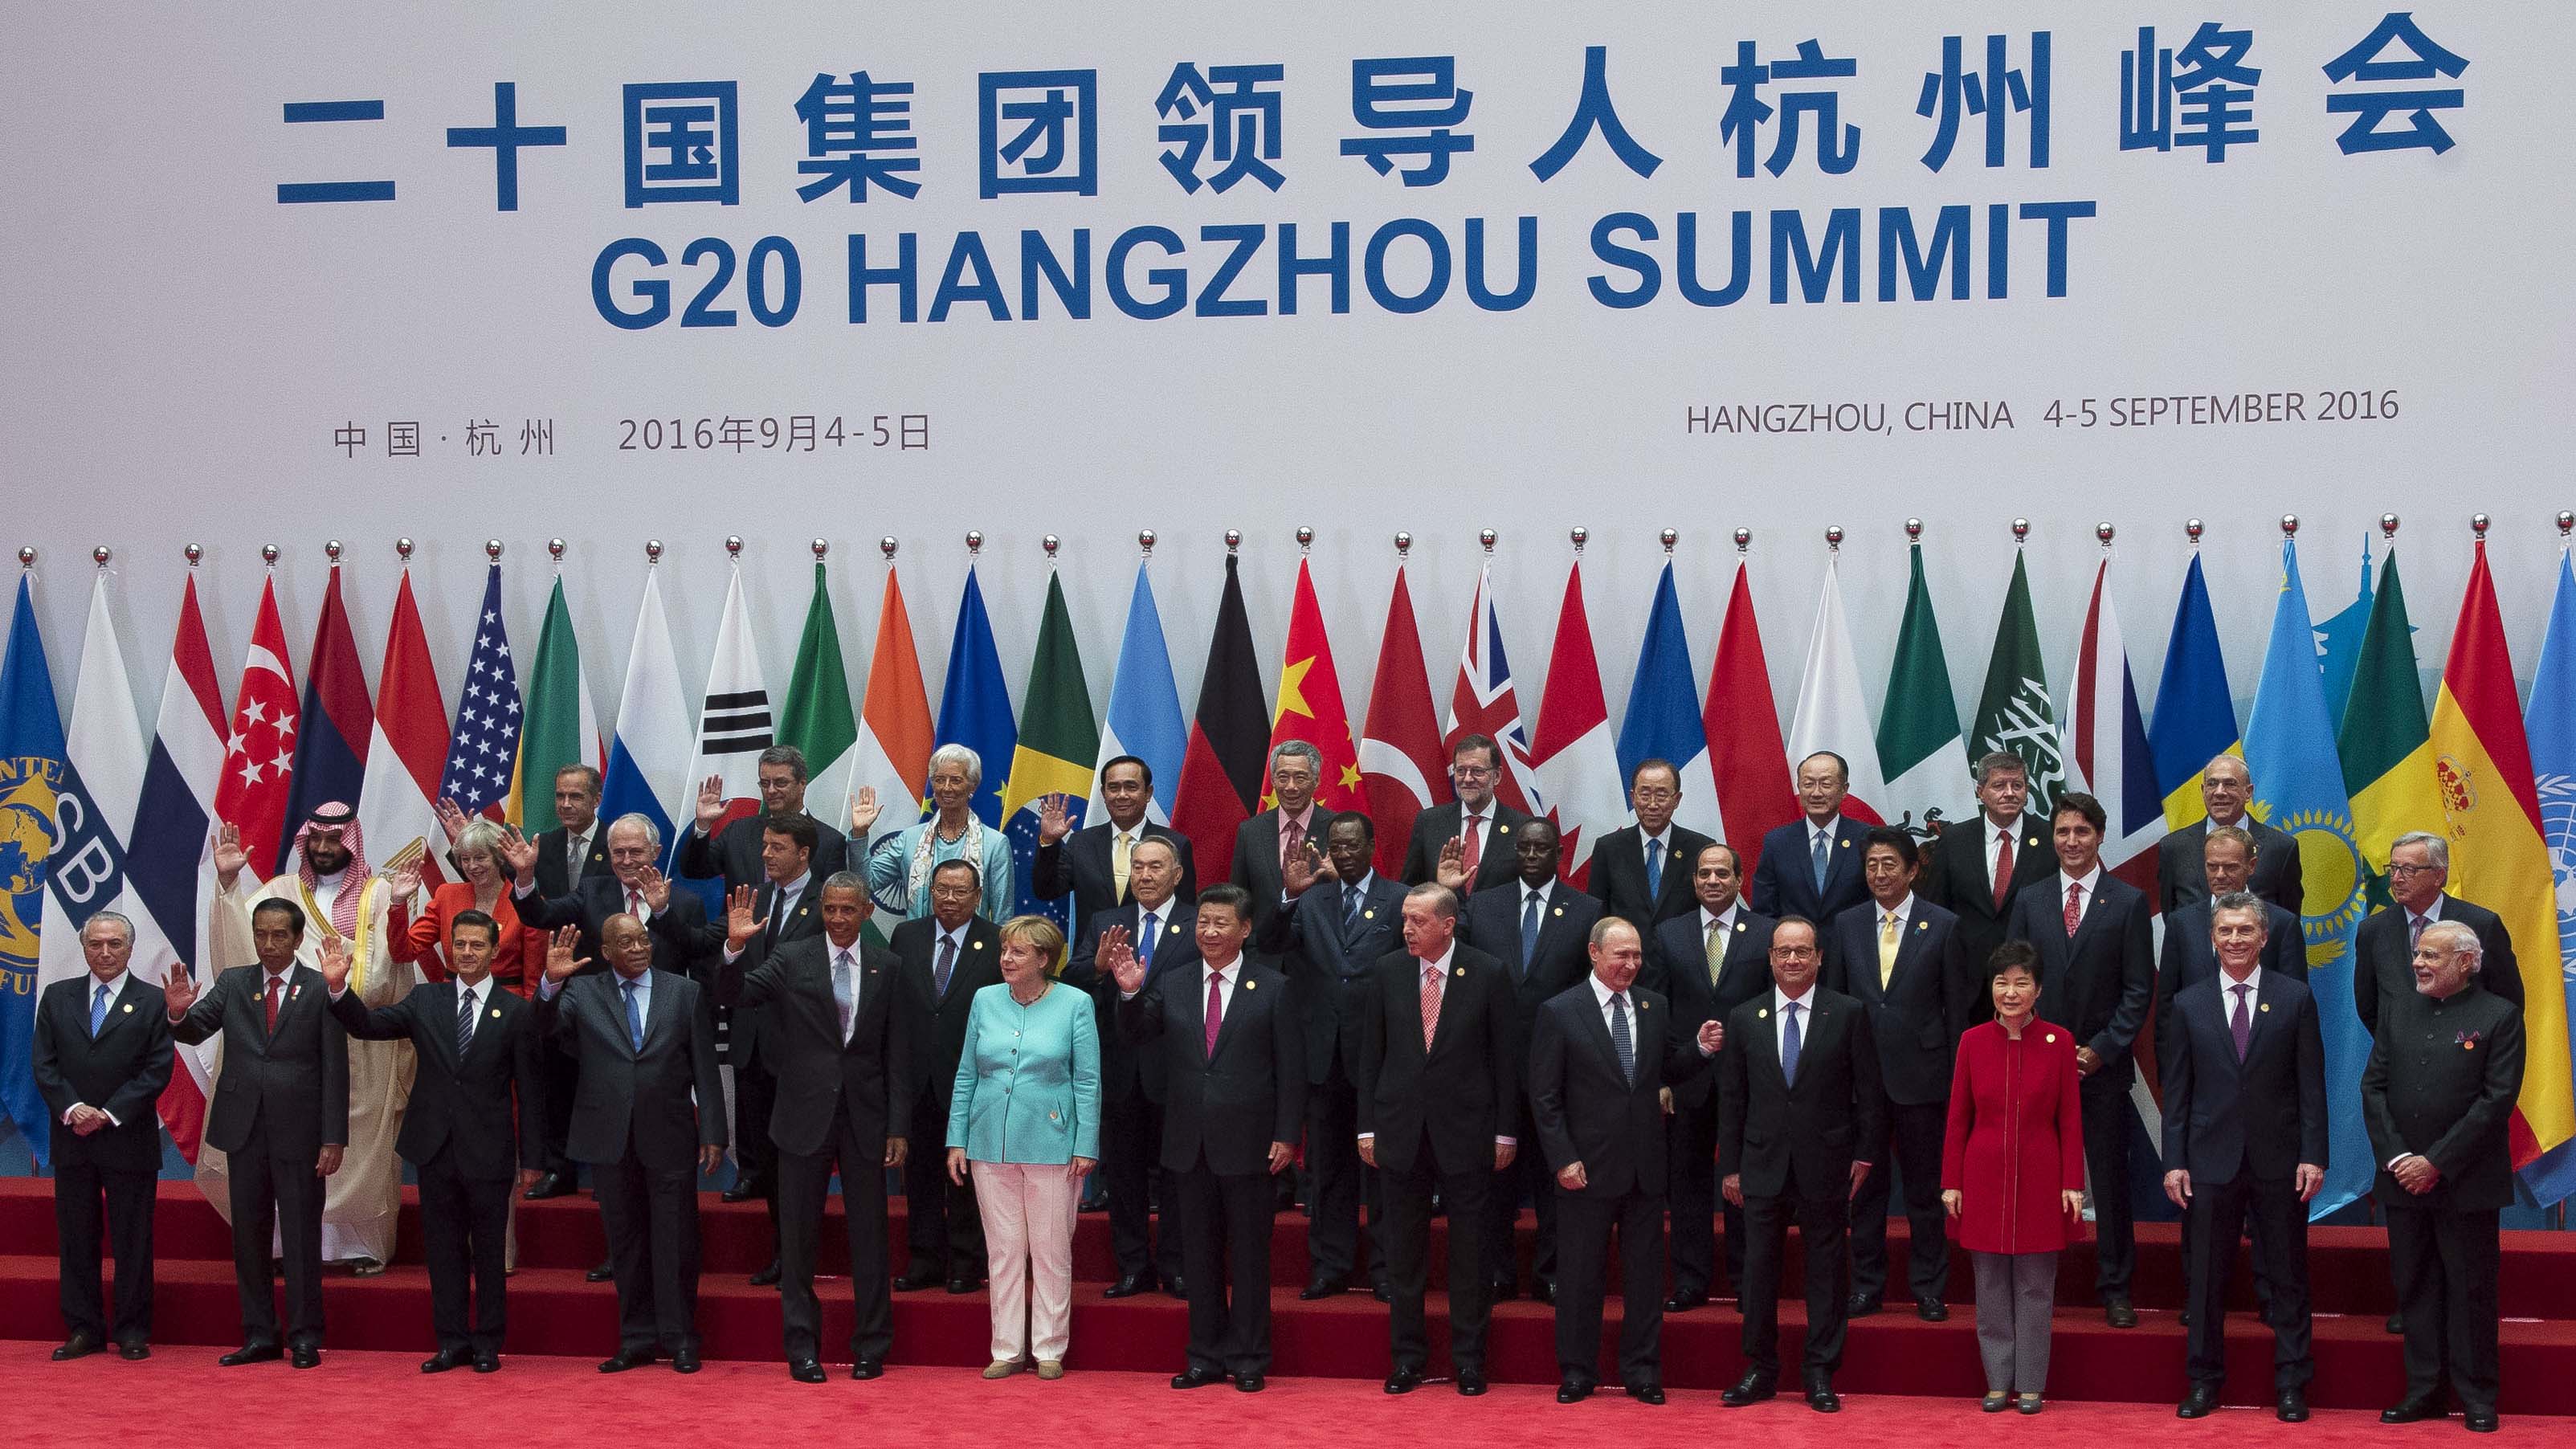 The image shows G20 leaders